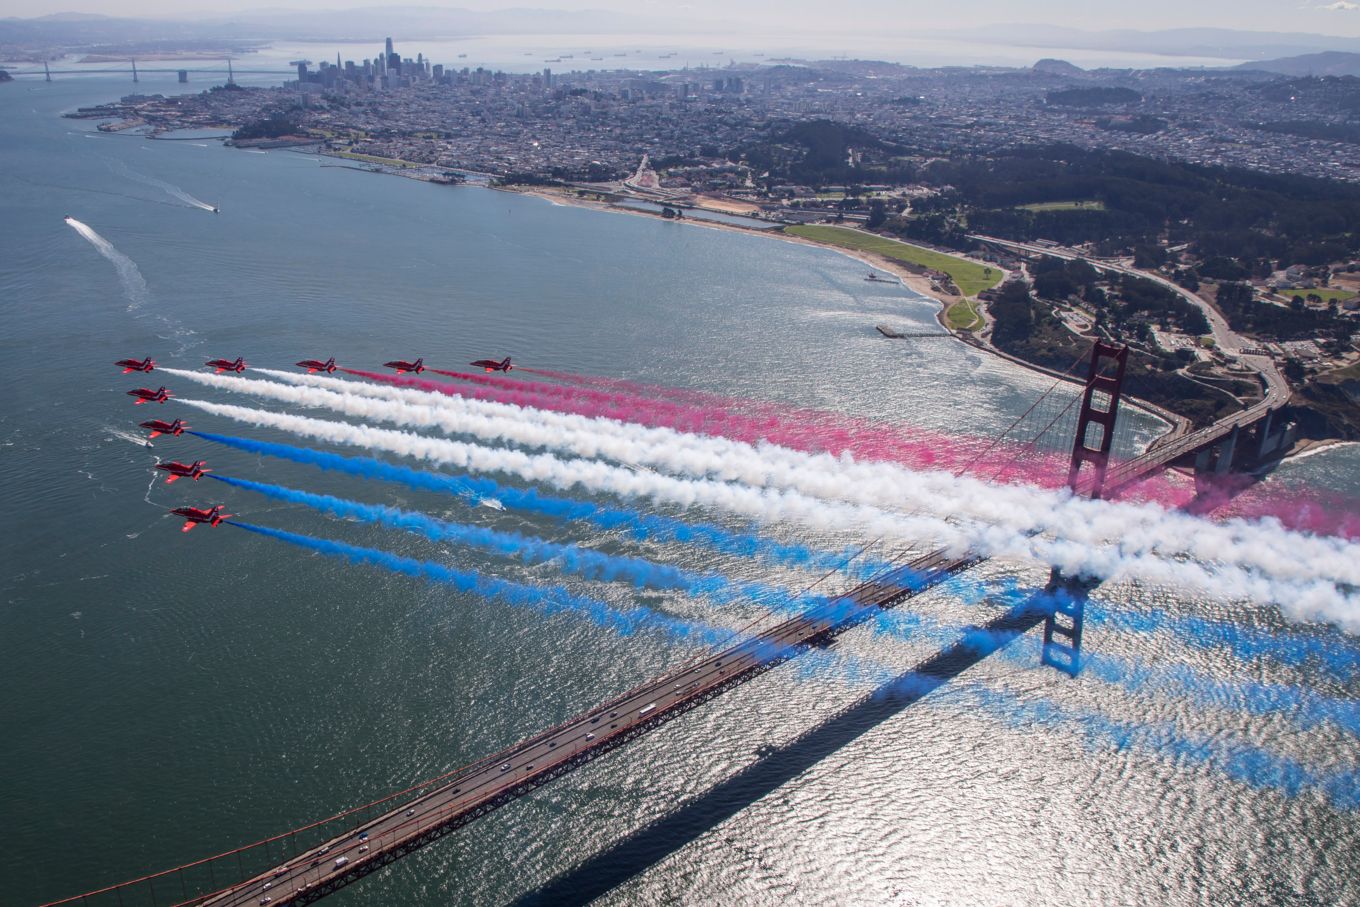 red-arrows-north-american-tour